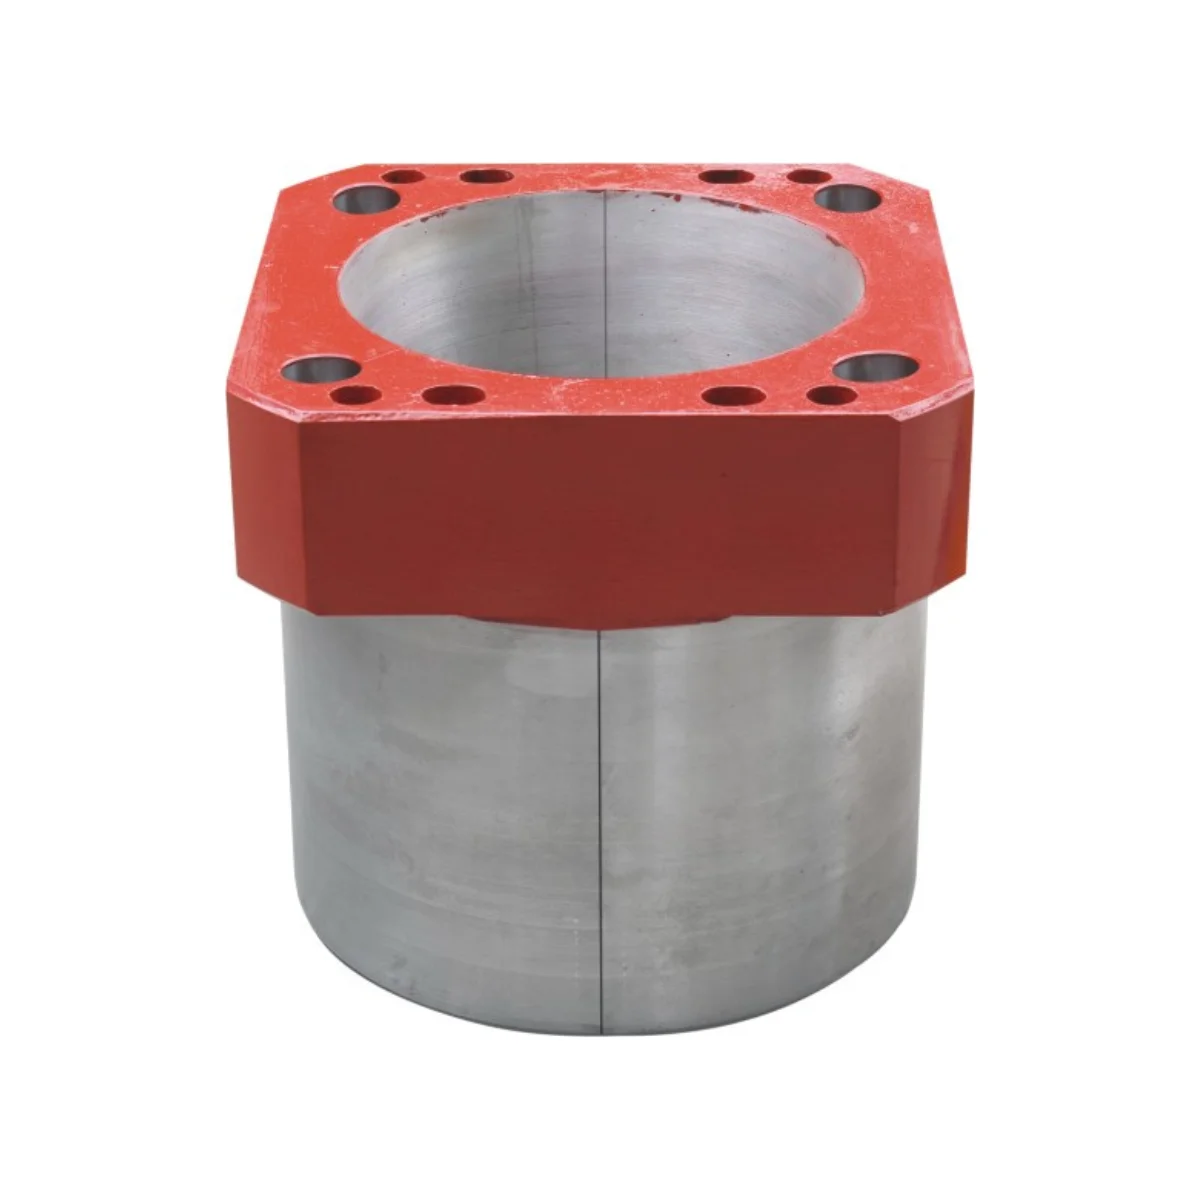 Master bushings inbuild taper design for 20.5" rotary tables, with equivalents from NOV, DenCon, Varco, Oilwell, Emsco, HMH, National, Forum, and BVm, ensure secure, efficient drilling.